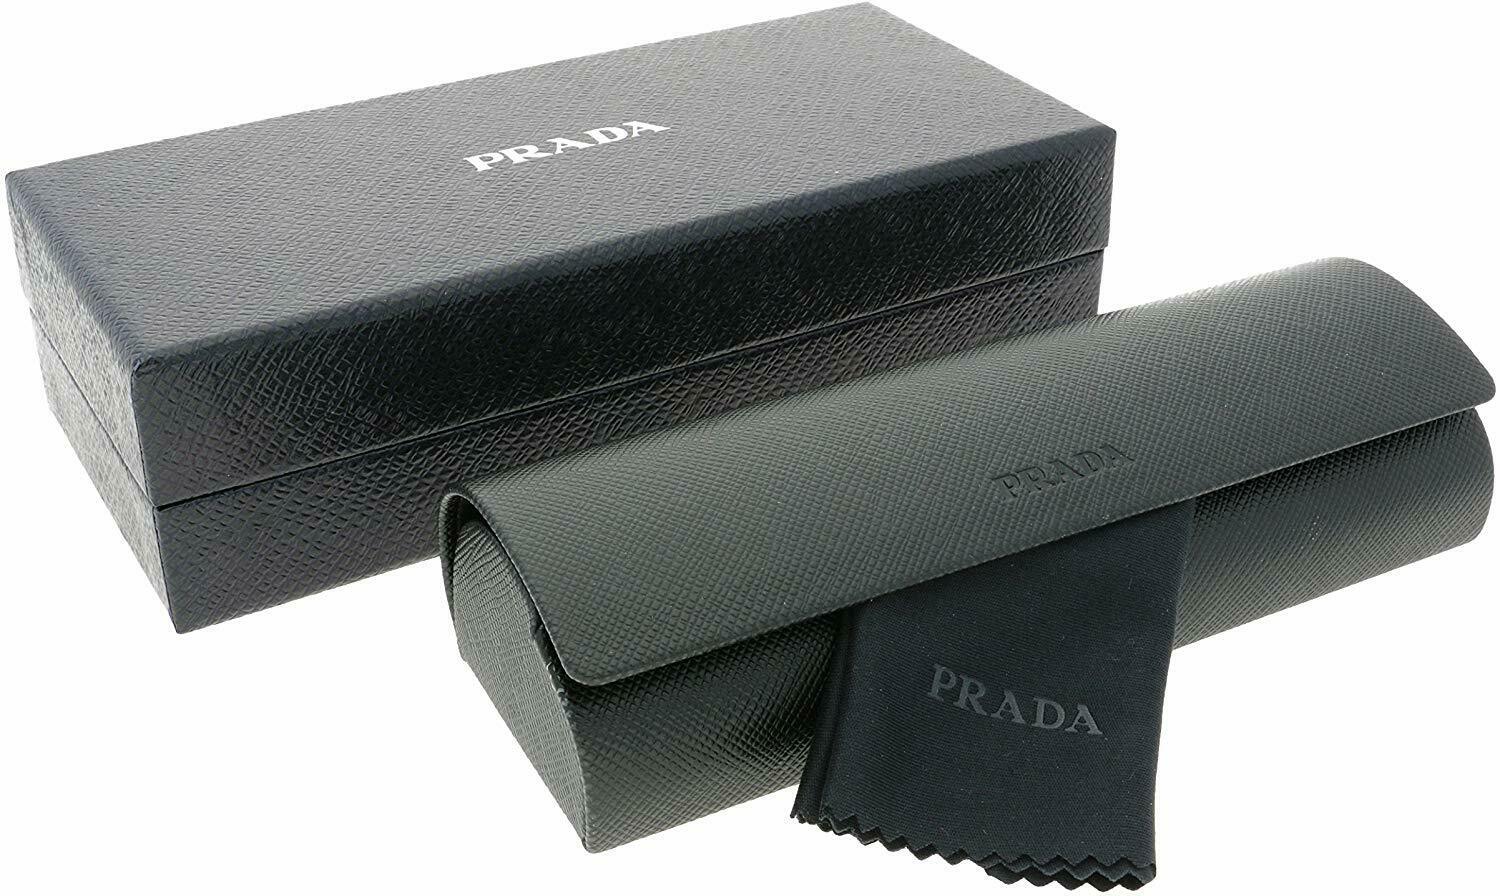 Prada Linea Rossi OPS 50LV 489101 Black Lifestyle Eyeglasses 53MM New Italy RX - image 5 of 5